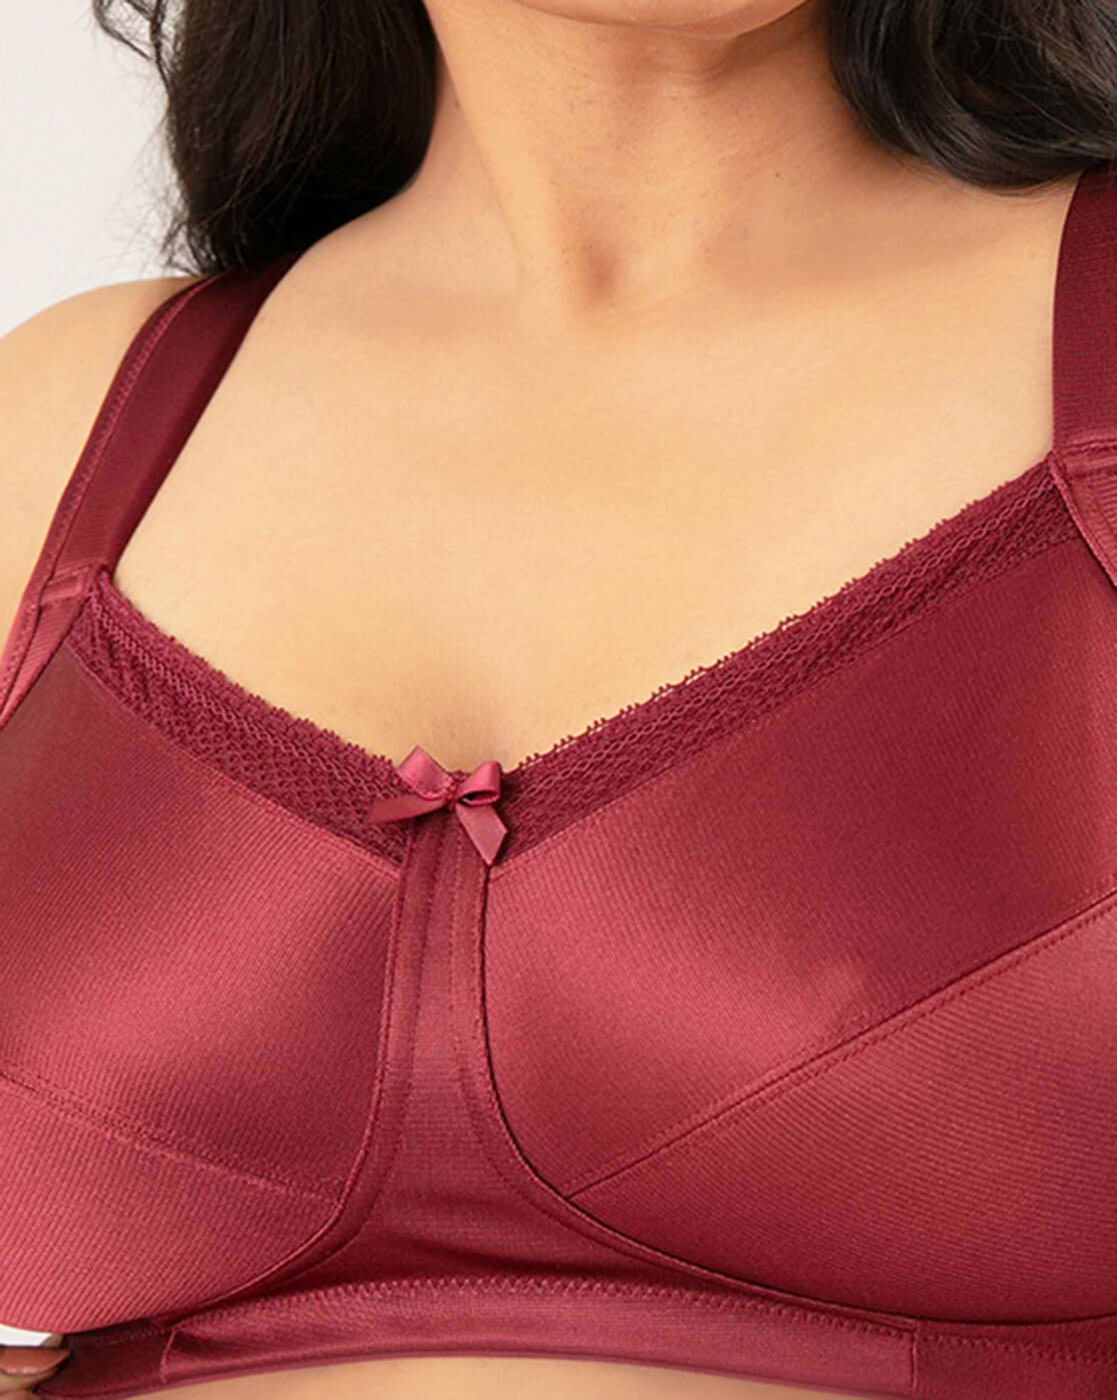 NYKD Women's Cotton Non-Padded Wire Free Full Coverage Bra, Maroon